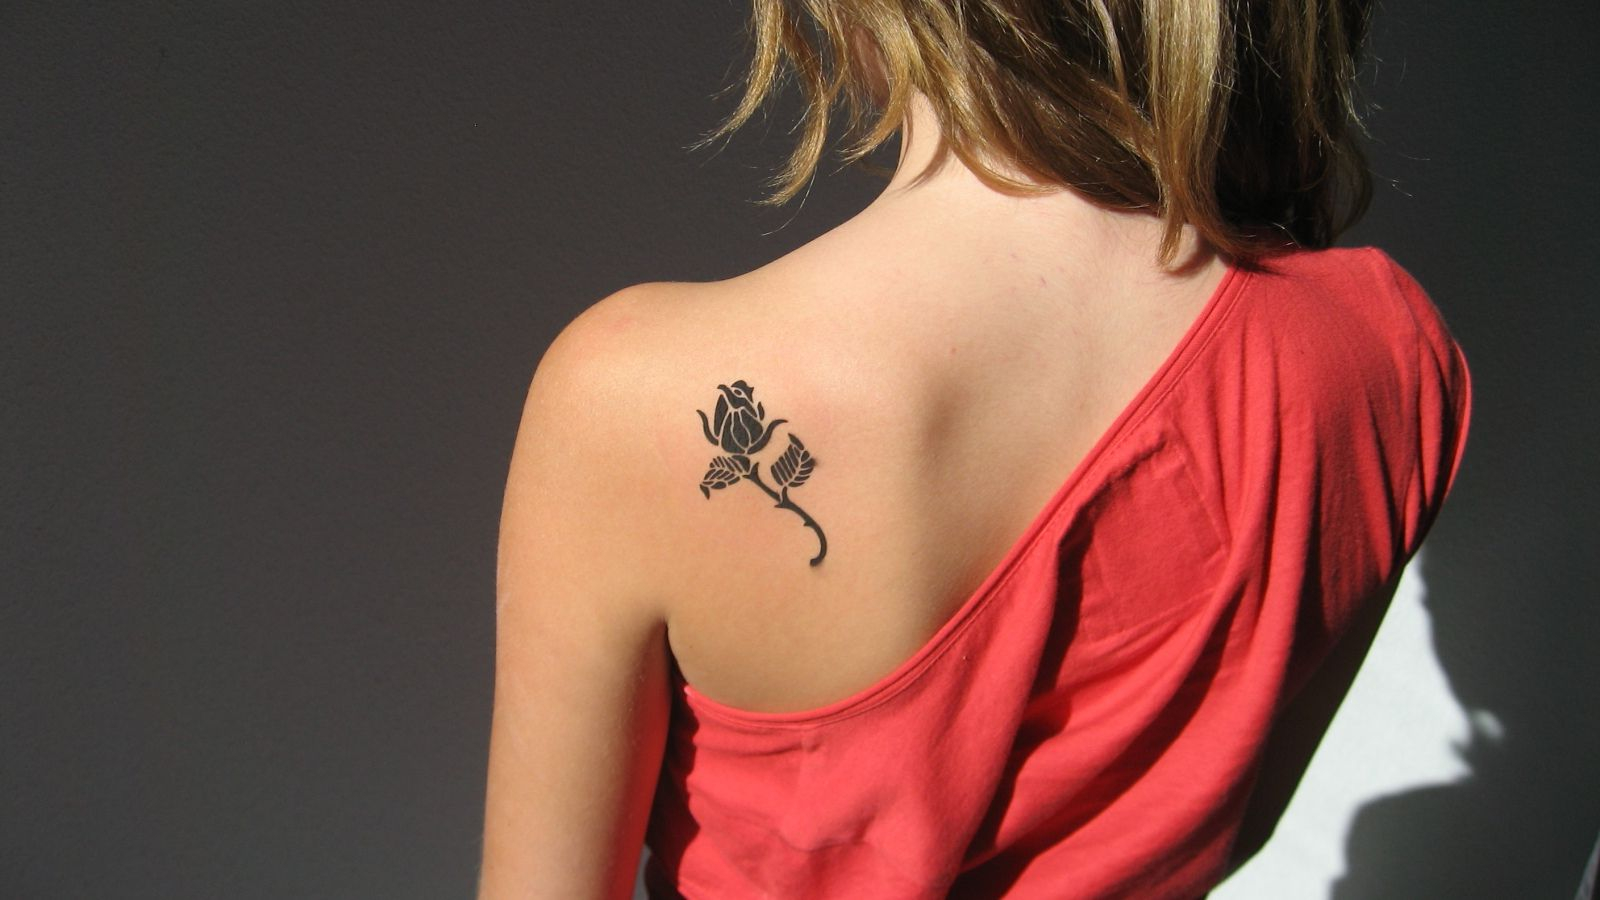 Girl Tattoos On Shoulder Blade 30 Small Cute Tattoos For Girls in size 1600 X 900